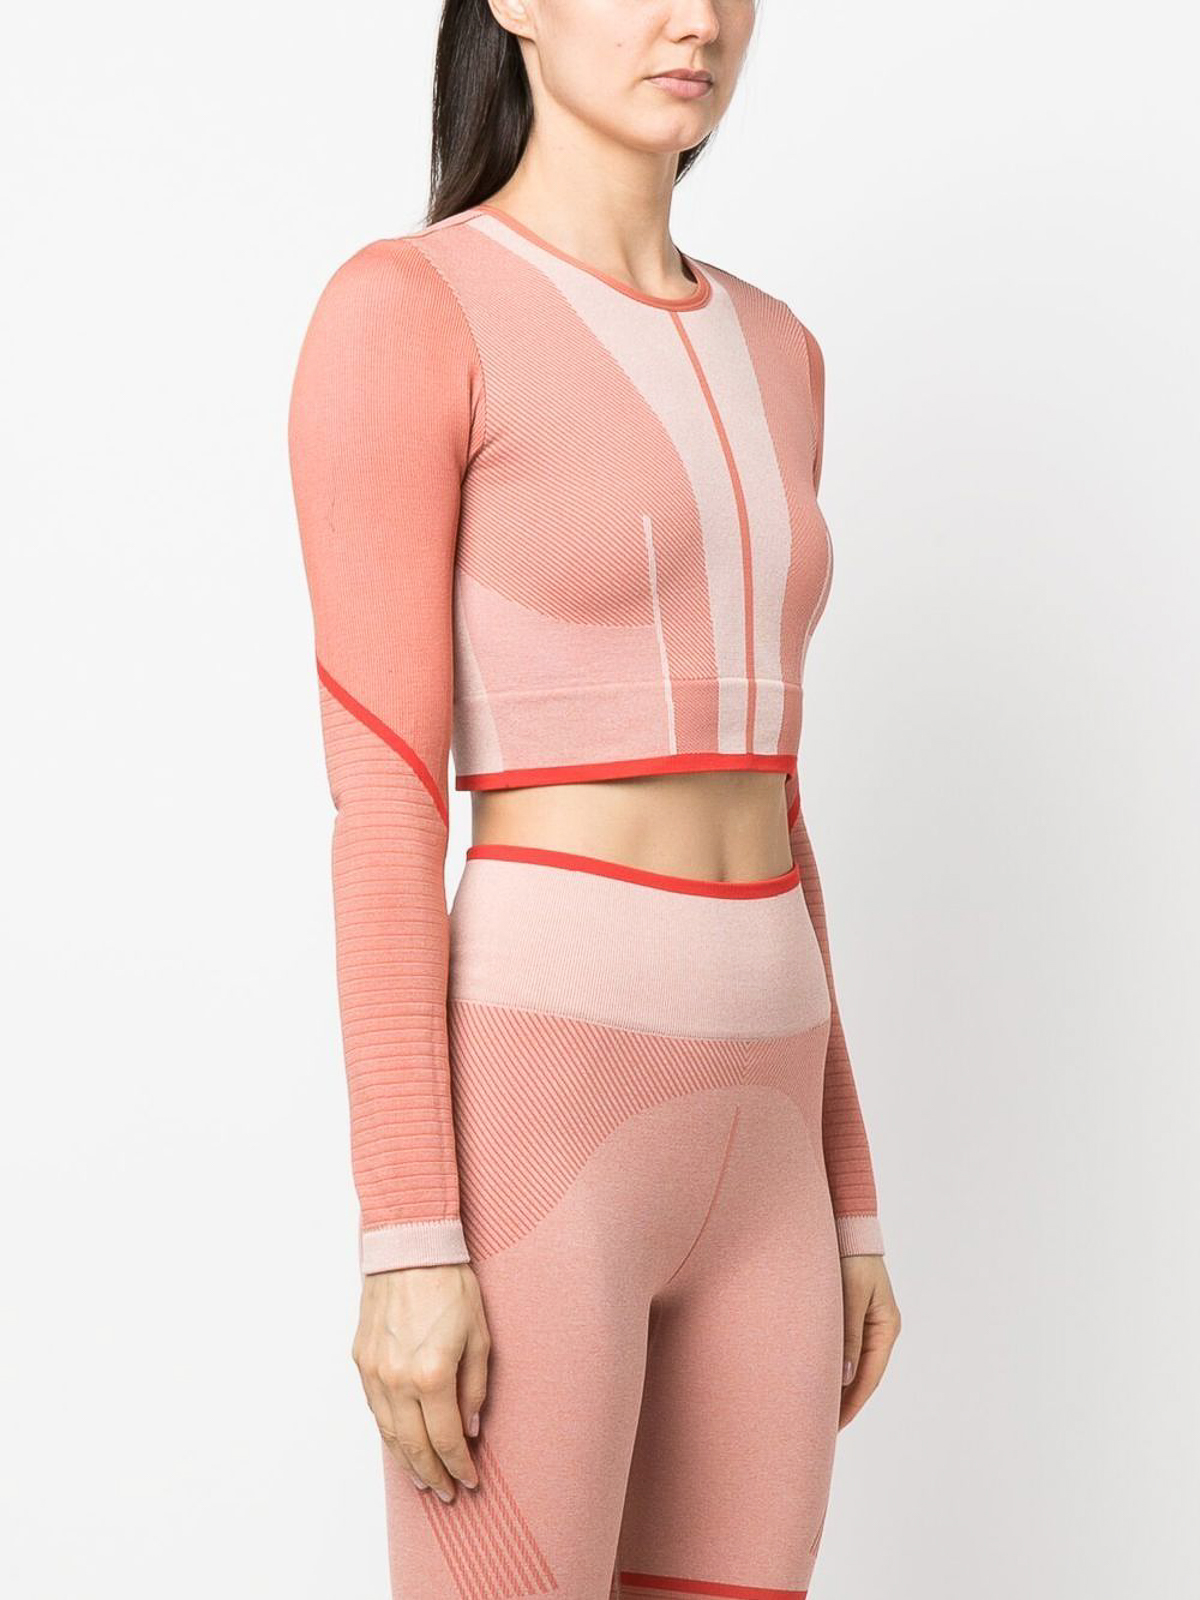 Aftensmad Terminal vejledning Tops & Tank tops Adidas by Stella McCartney - True Strength Seamless long  sleeve top - HS5782